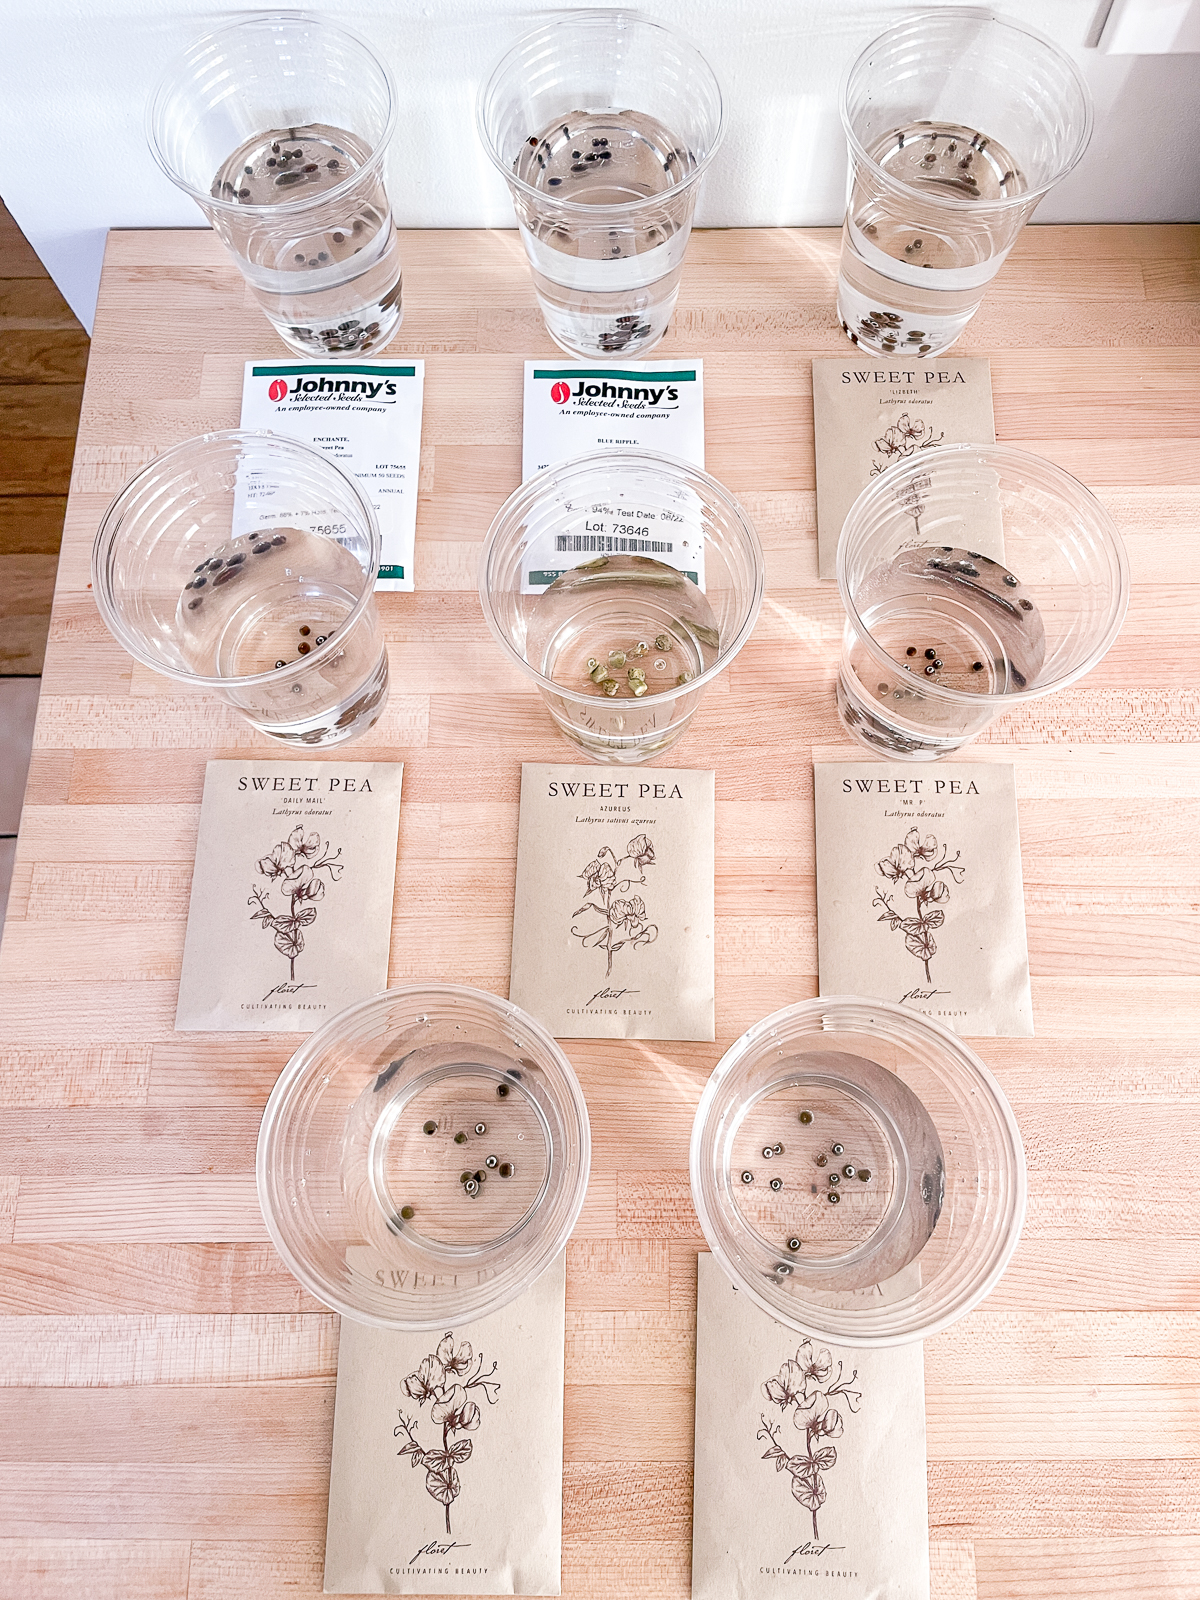 soaking sweet pea seeds in water in plastic cups with seed packets in front